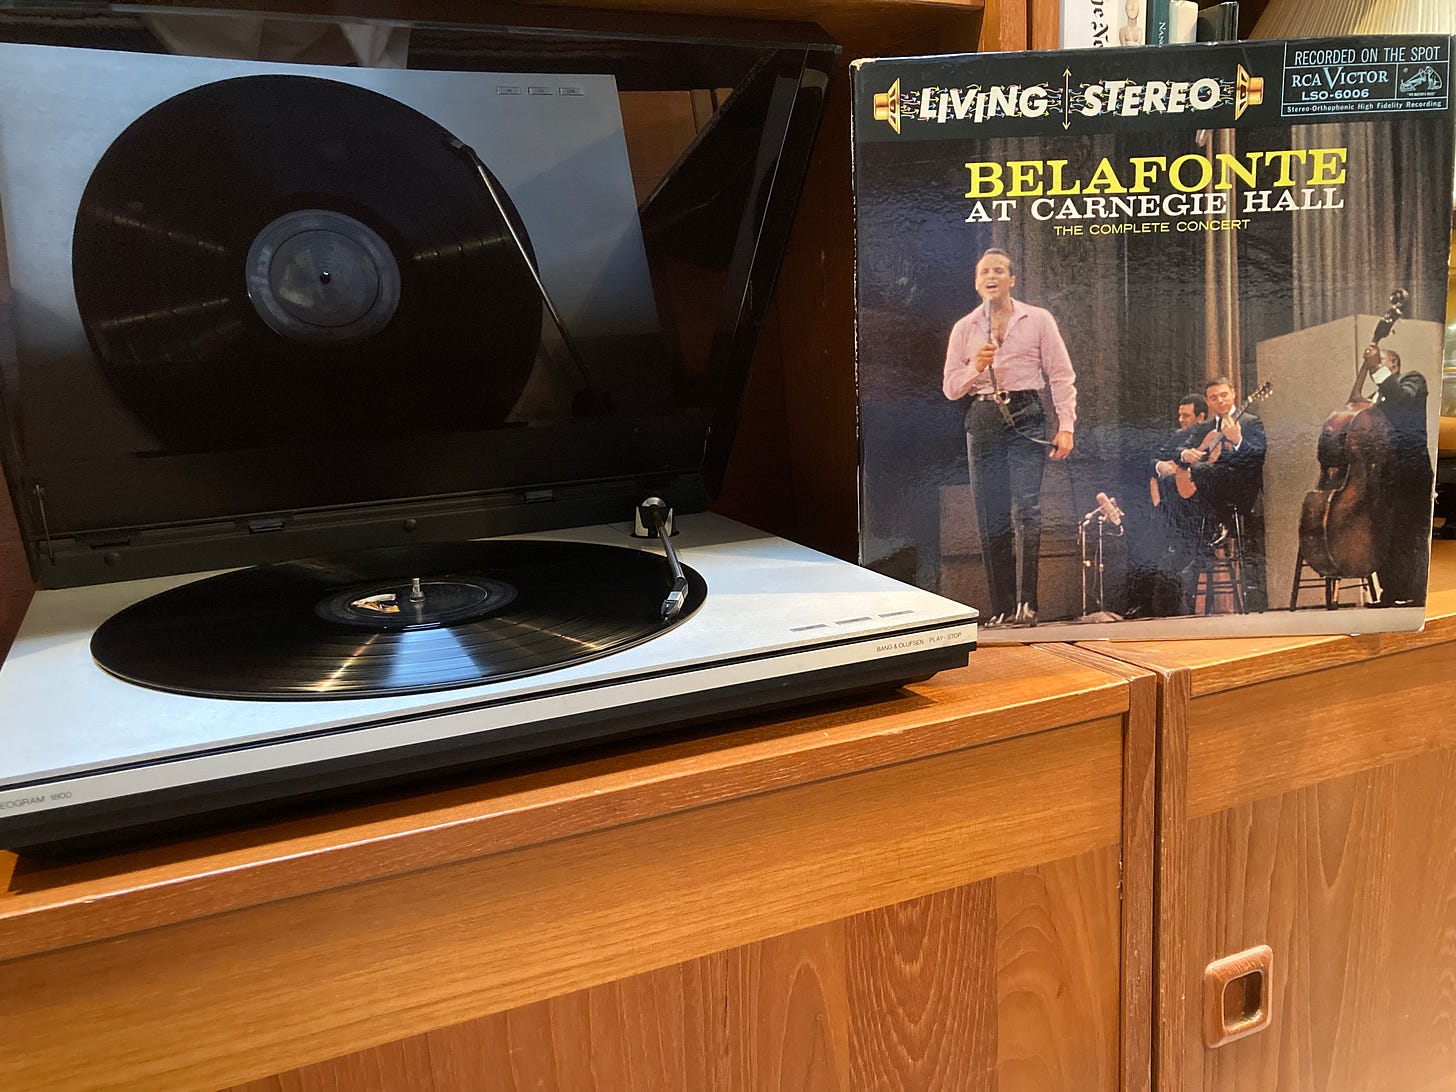 Author photo of turntable with album cover of Belafonte concert 